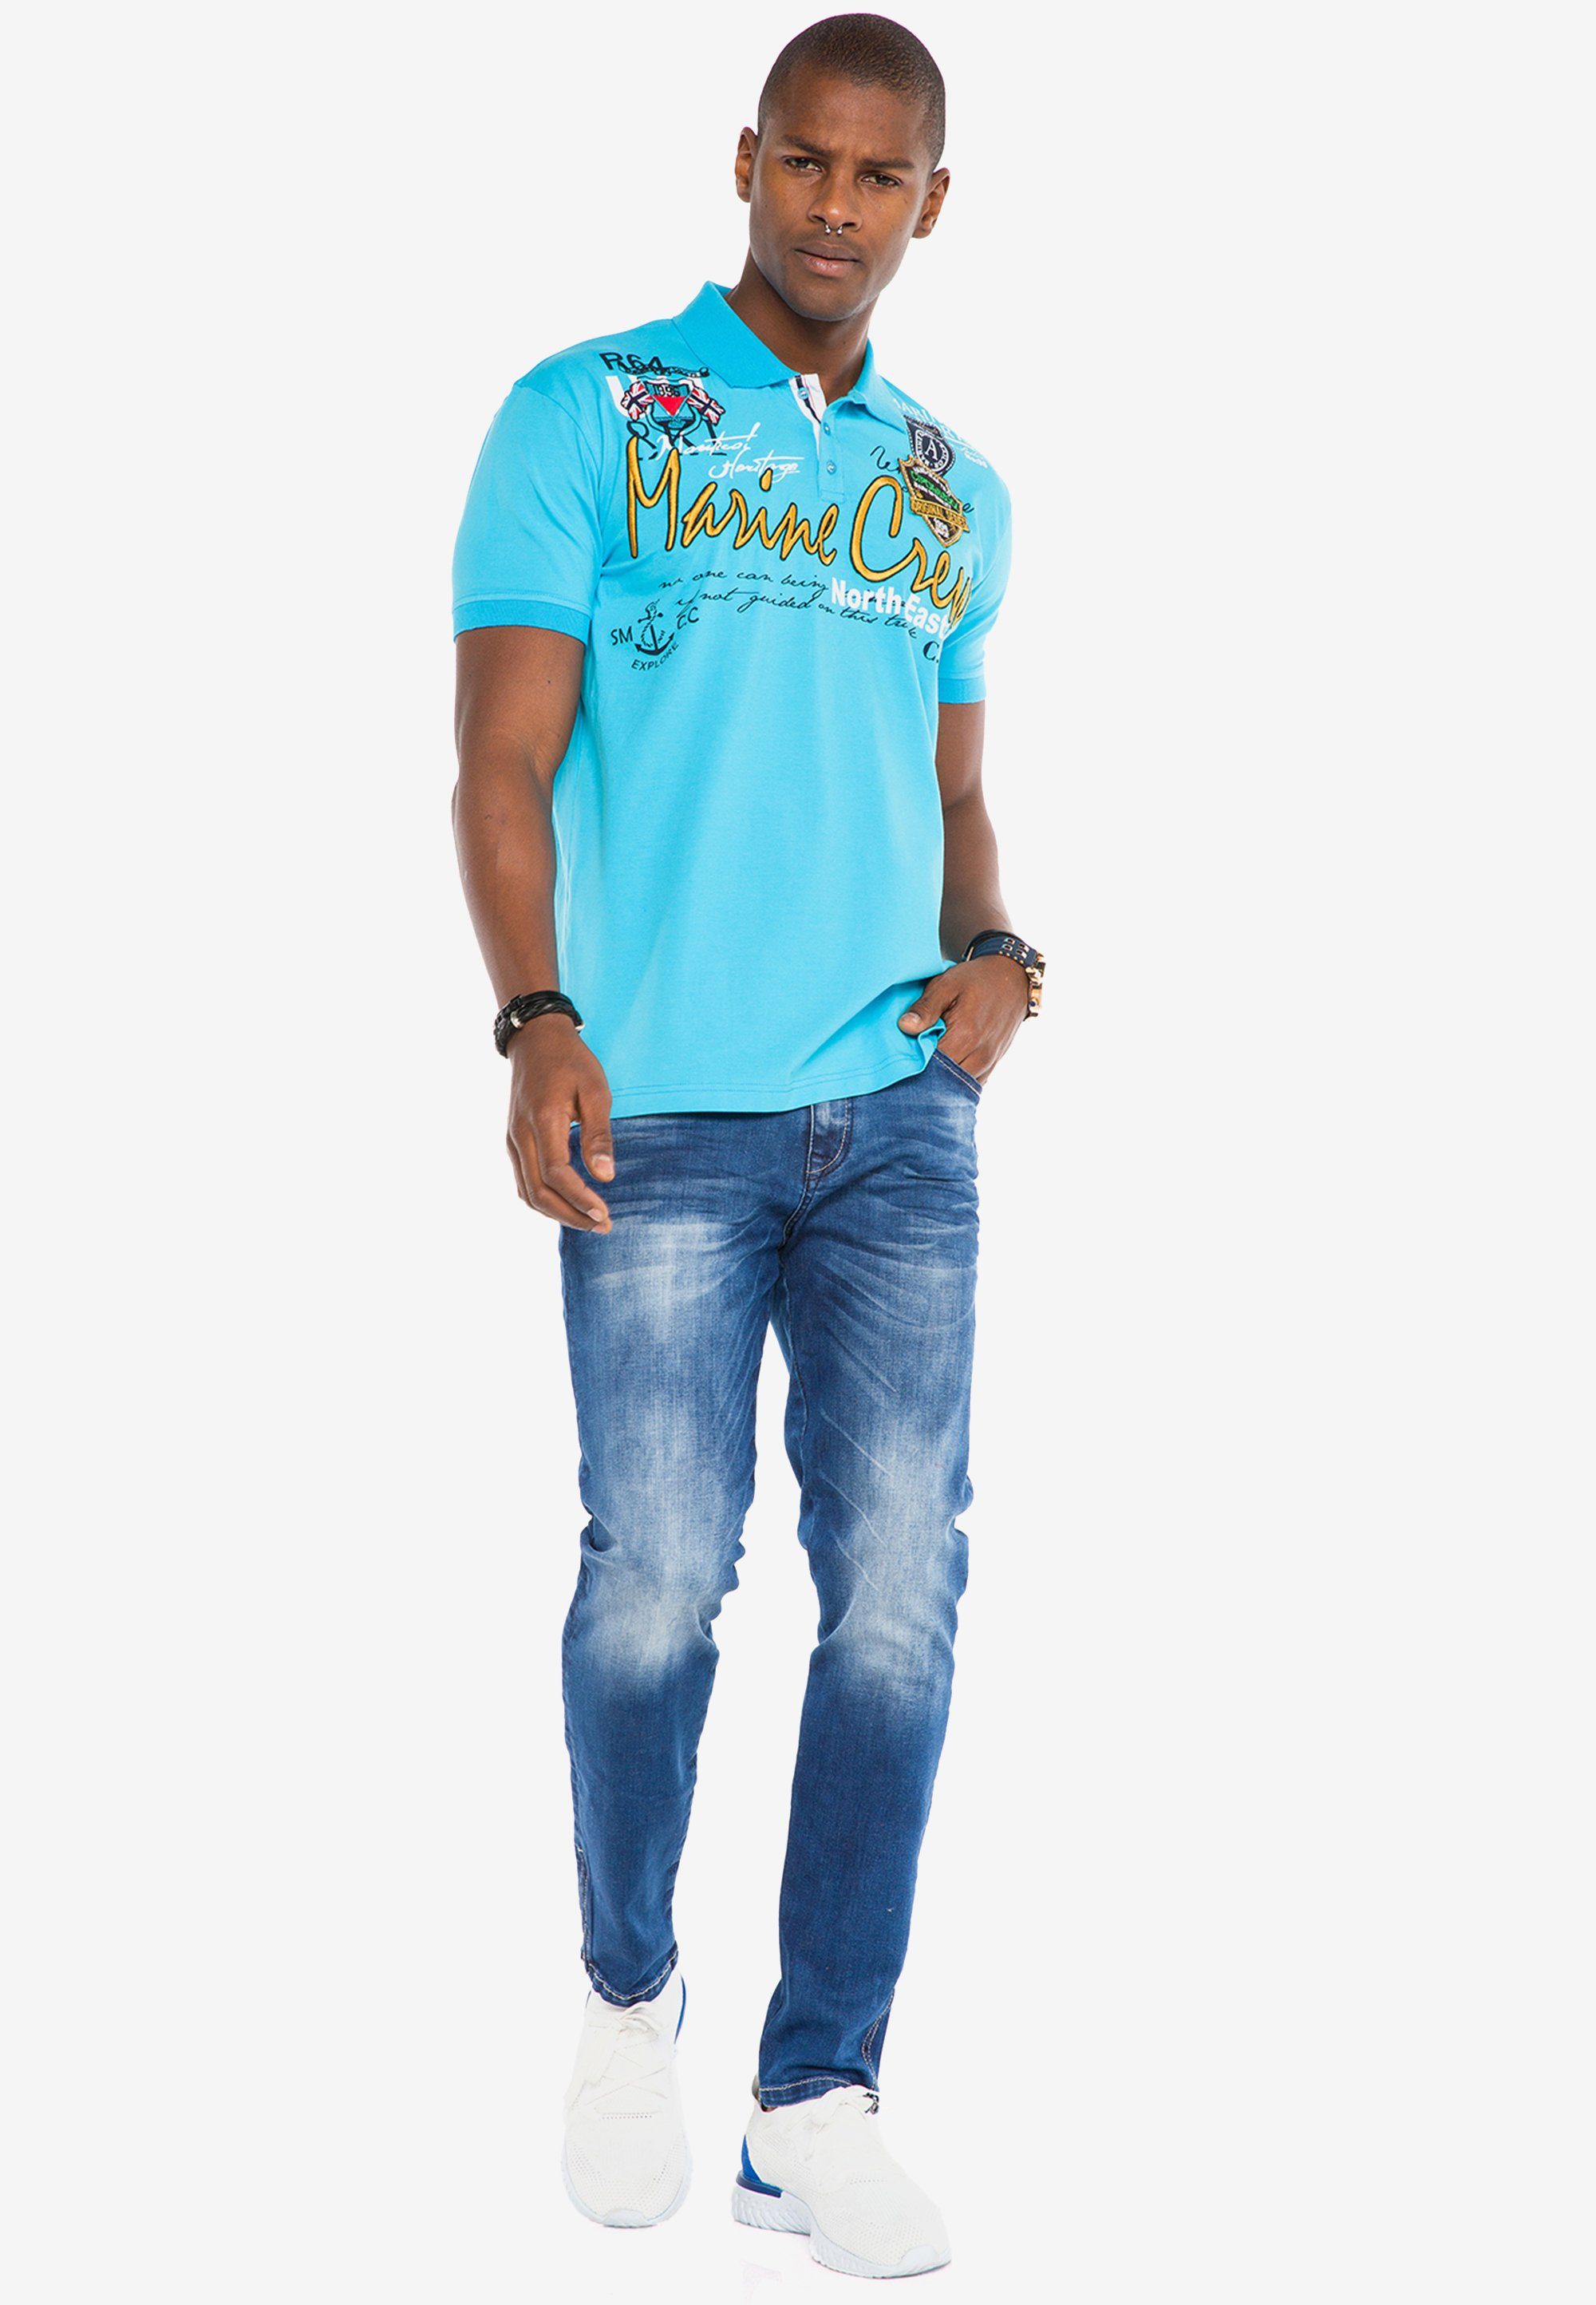 Cipo & in Waschung mit Straight Fit Baxx cooler Slim-fit-Jeans